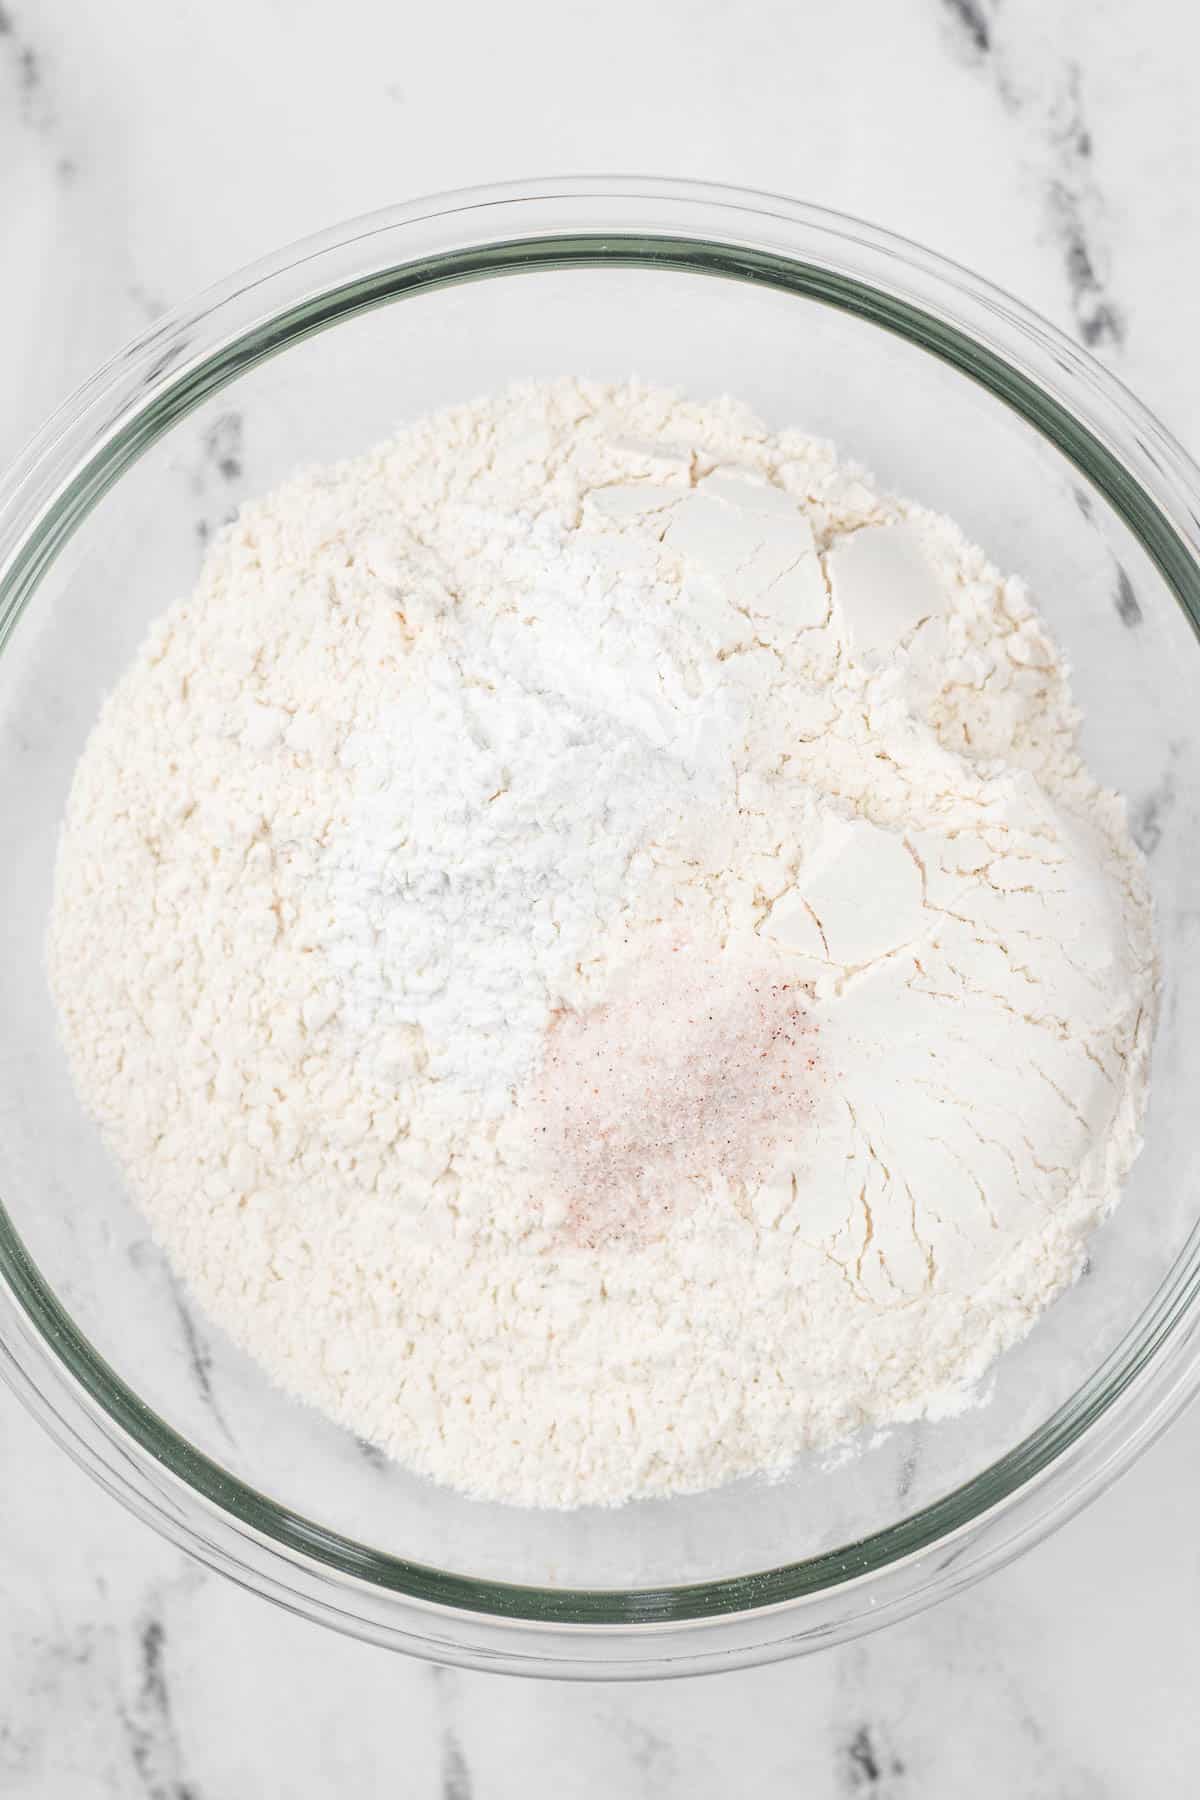 A glass mixing bowl filled with flour, with a little baking powder and salt on top.